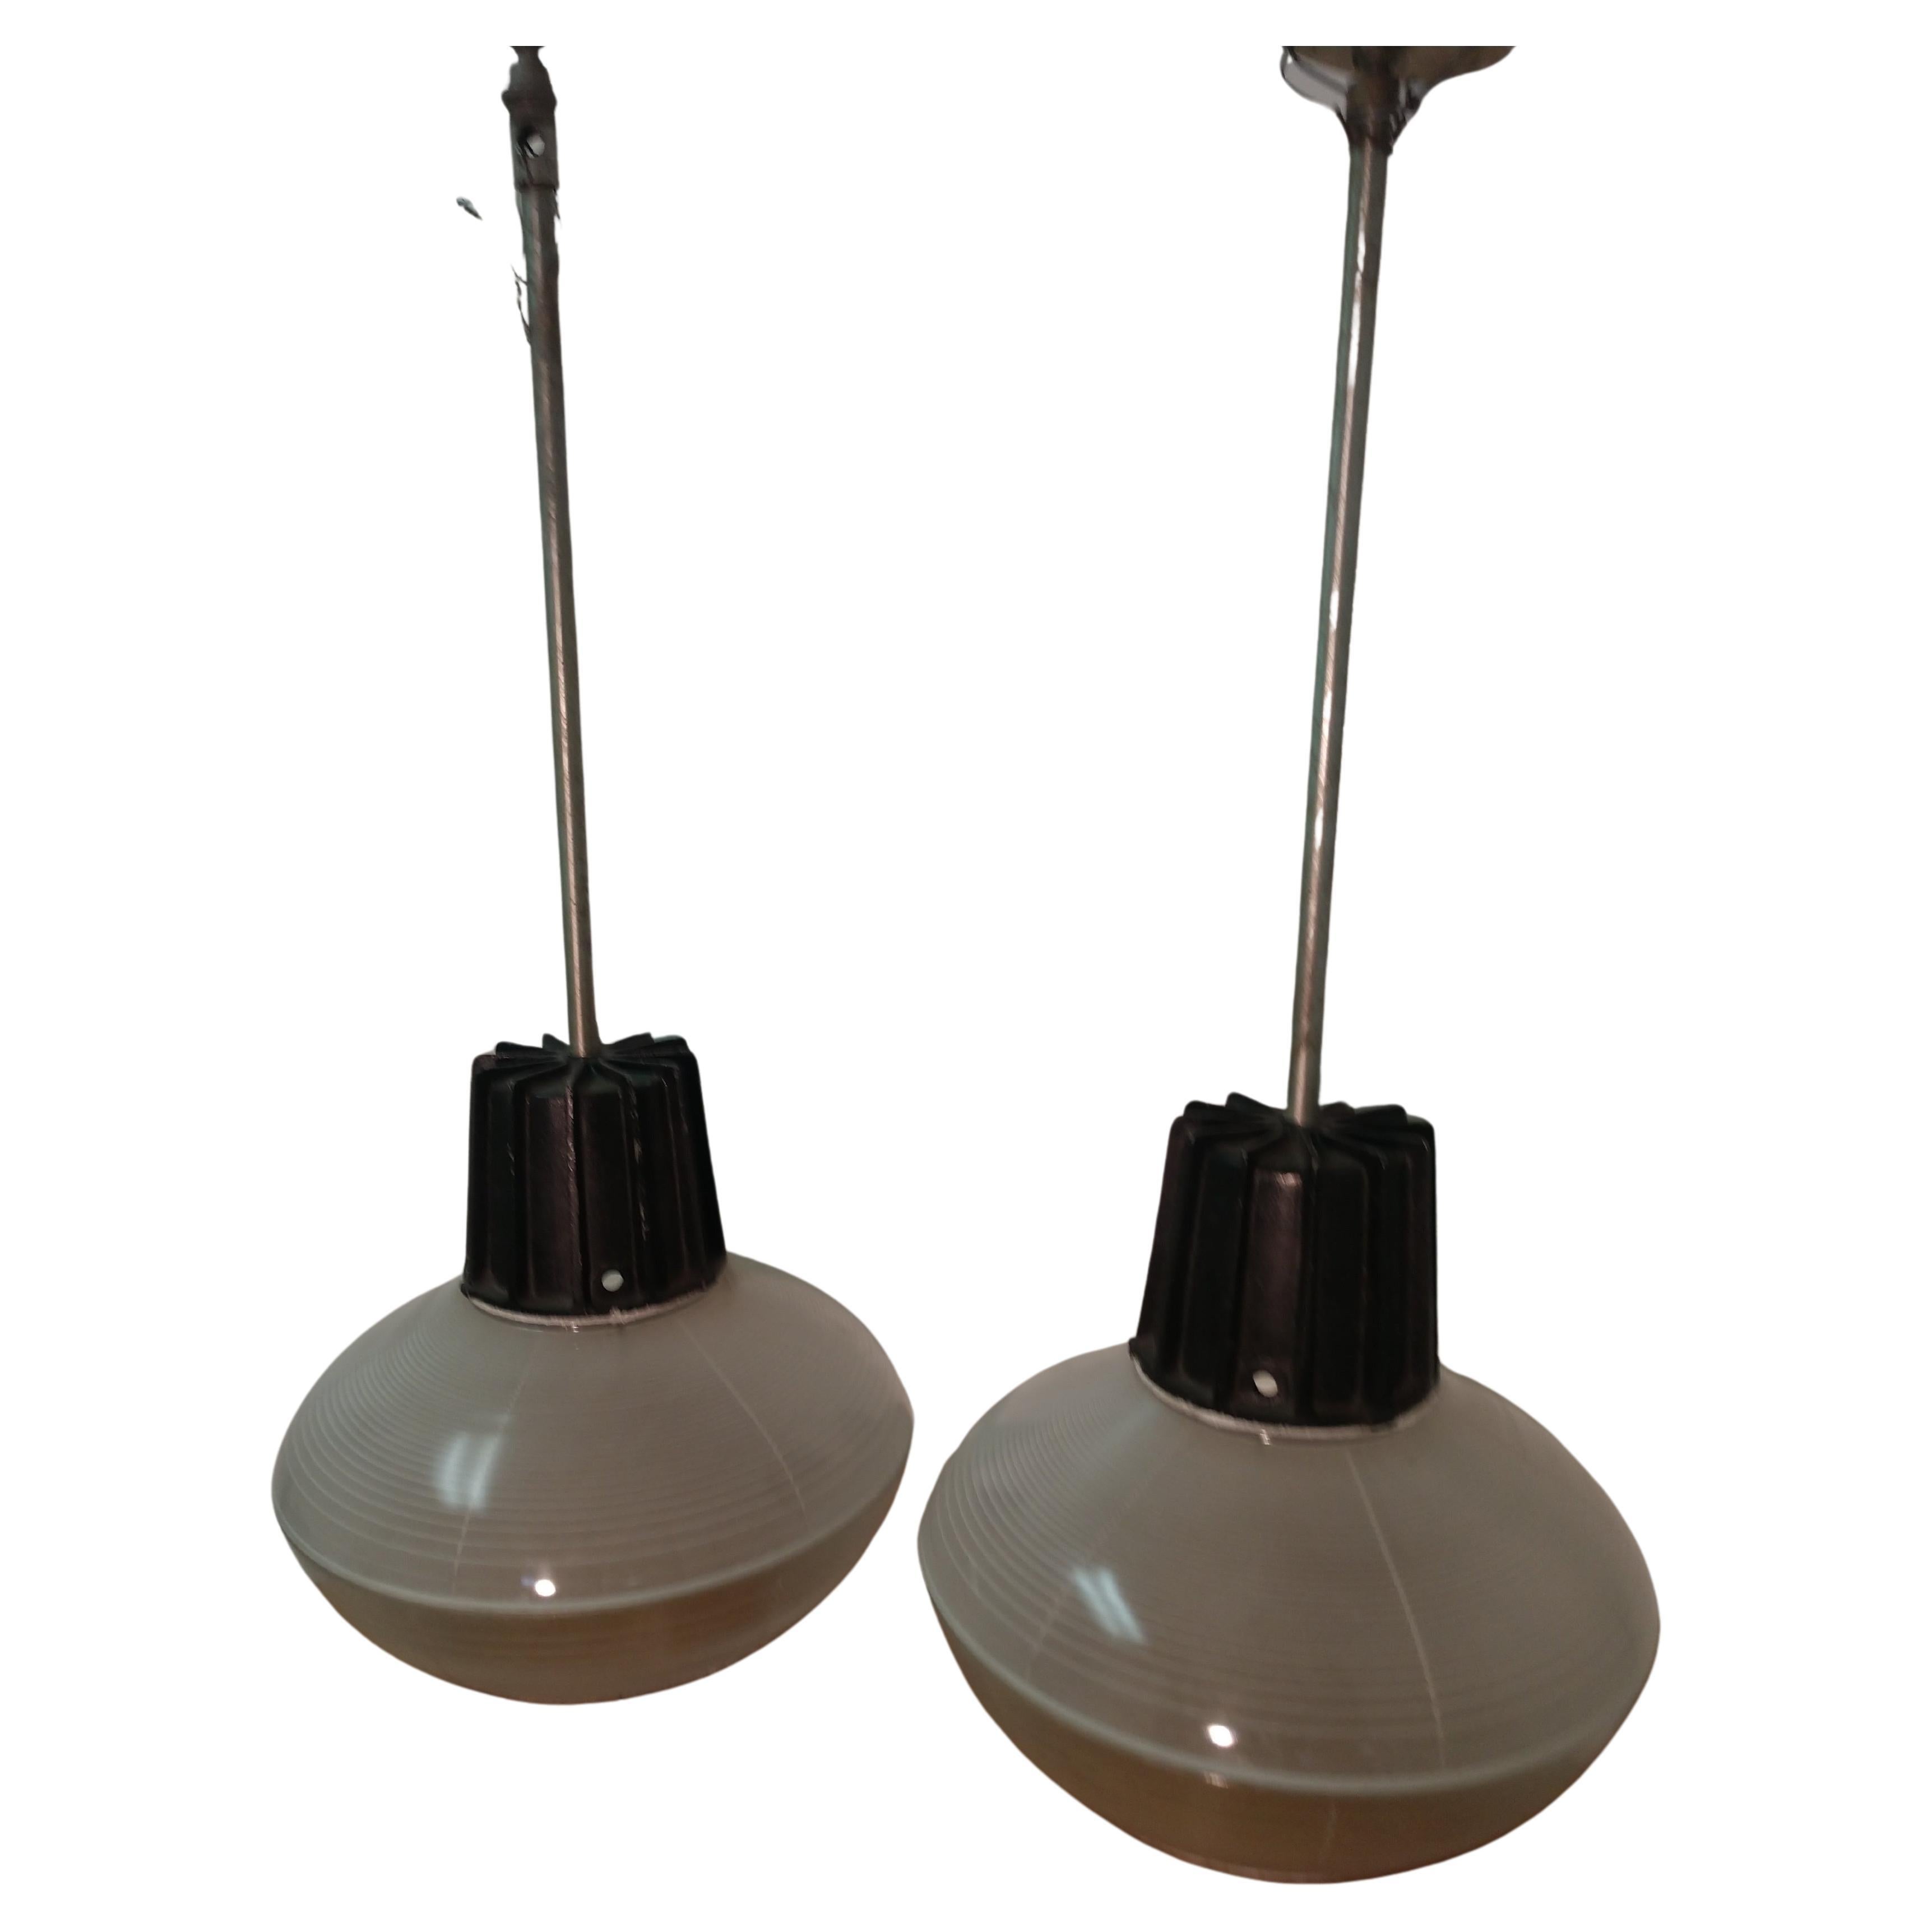 American Pair of Mid-Century Modern C1955 Holophane Industrial Lamps For Sale